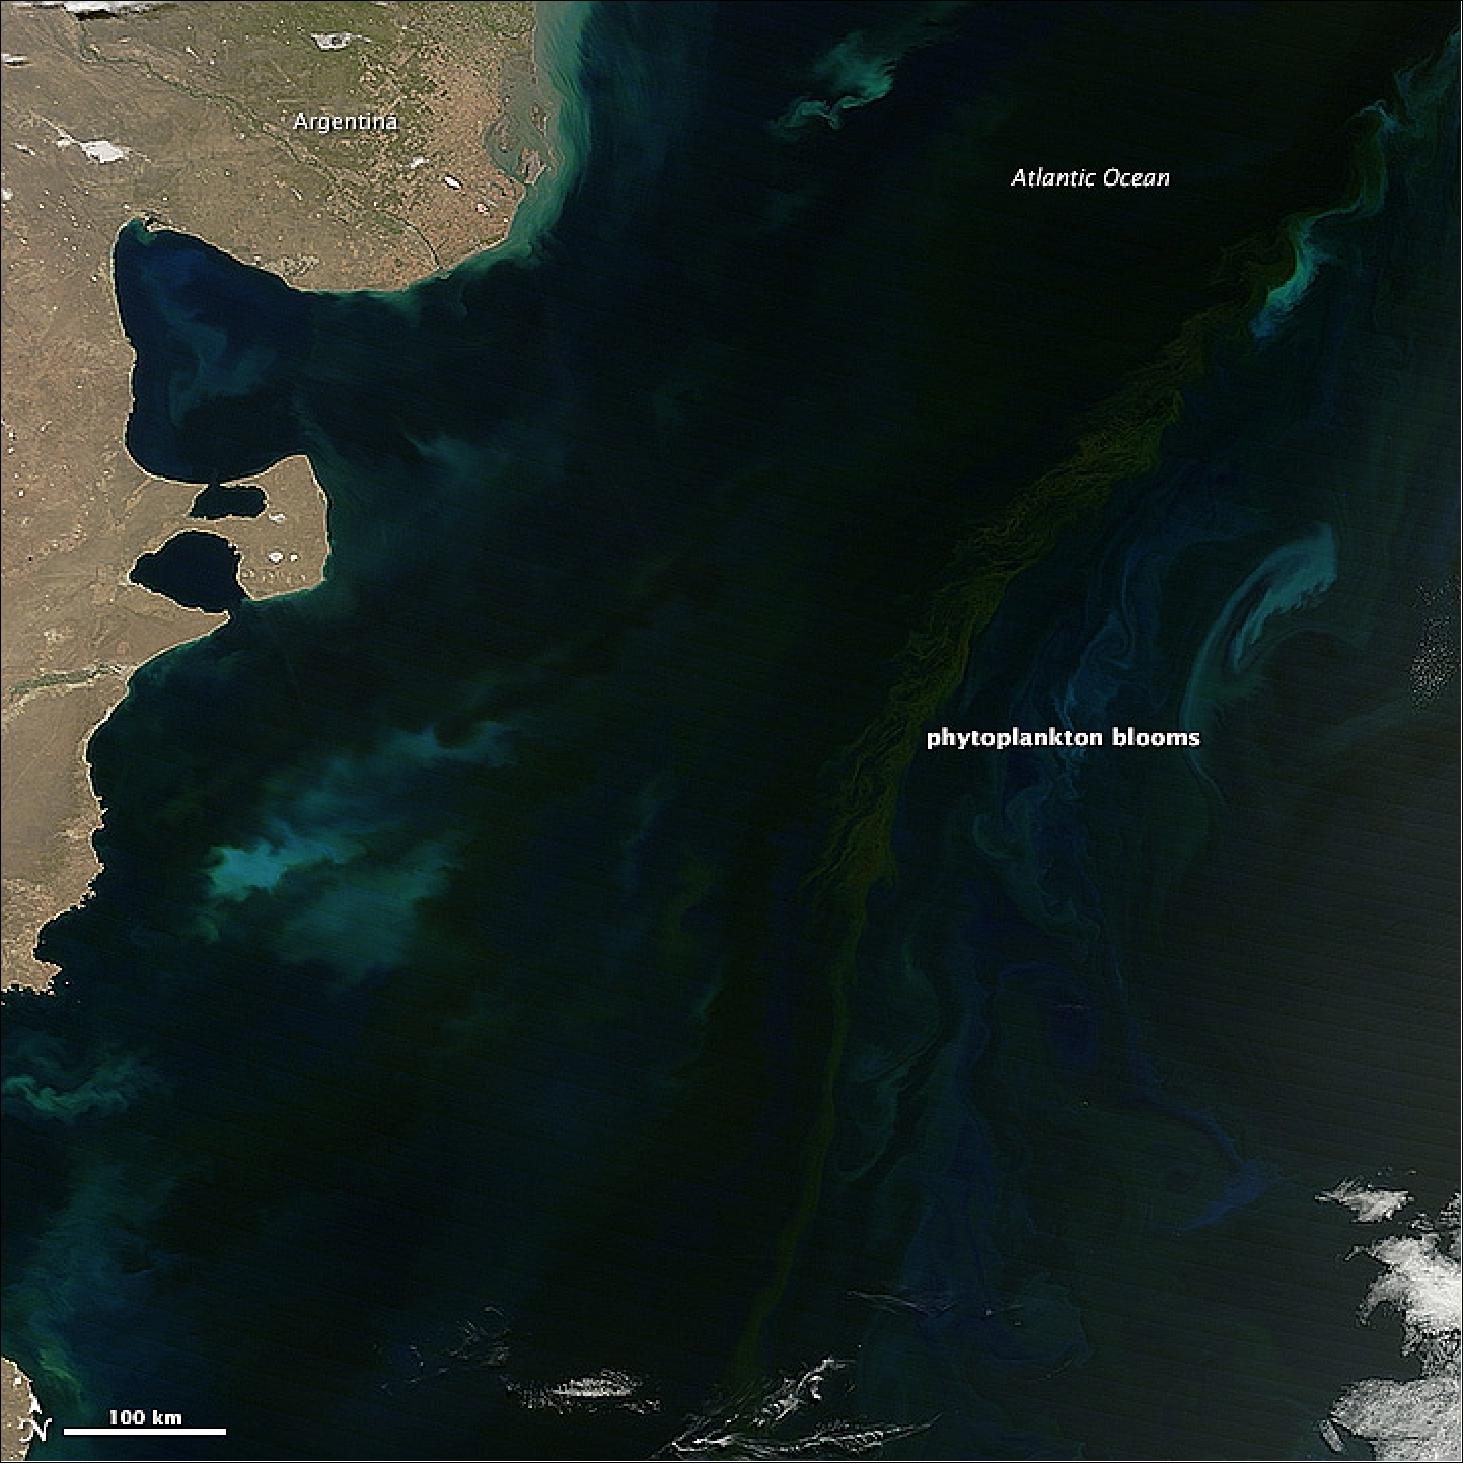 Figure 111: The MODIS instrument on NASA's Terra satellite acquired this natural-color image on Nov. 26, 2013 (image credit: NASA)